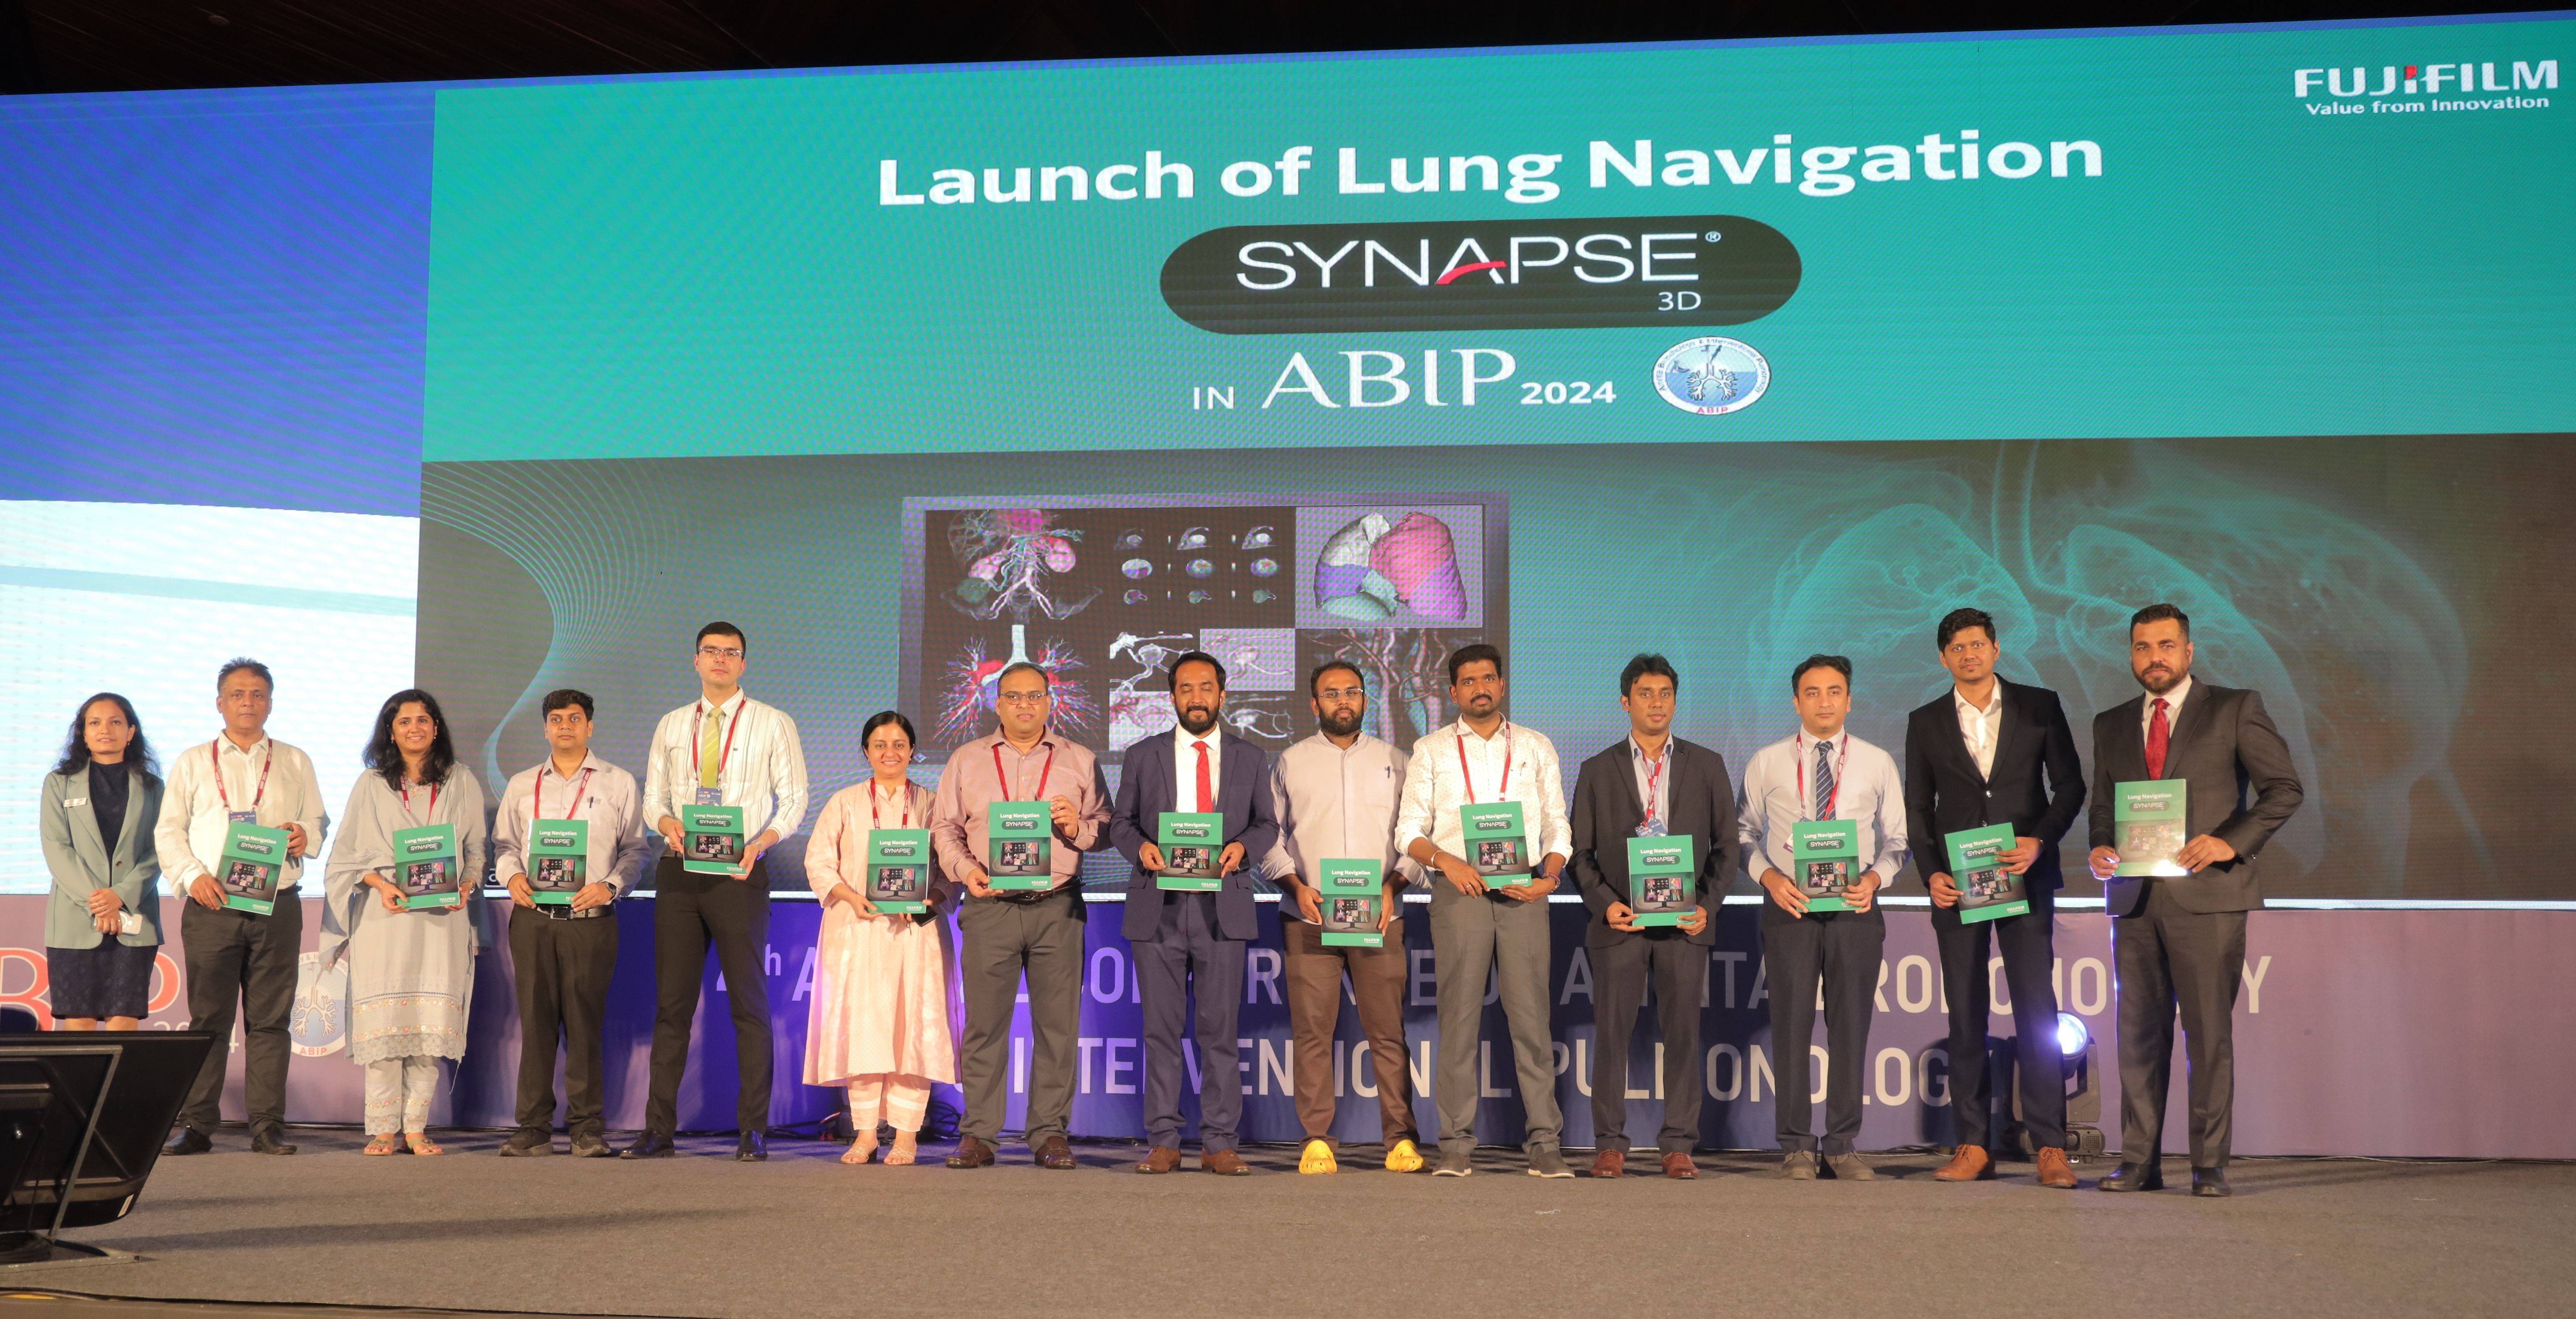 FUJIFILM India Introduces Revolutionary Lung Navigation Technology at ABIP Event